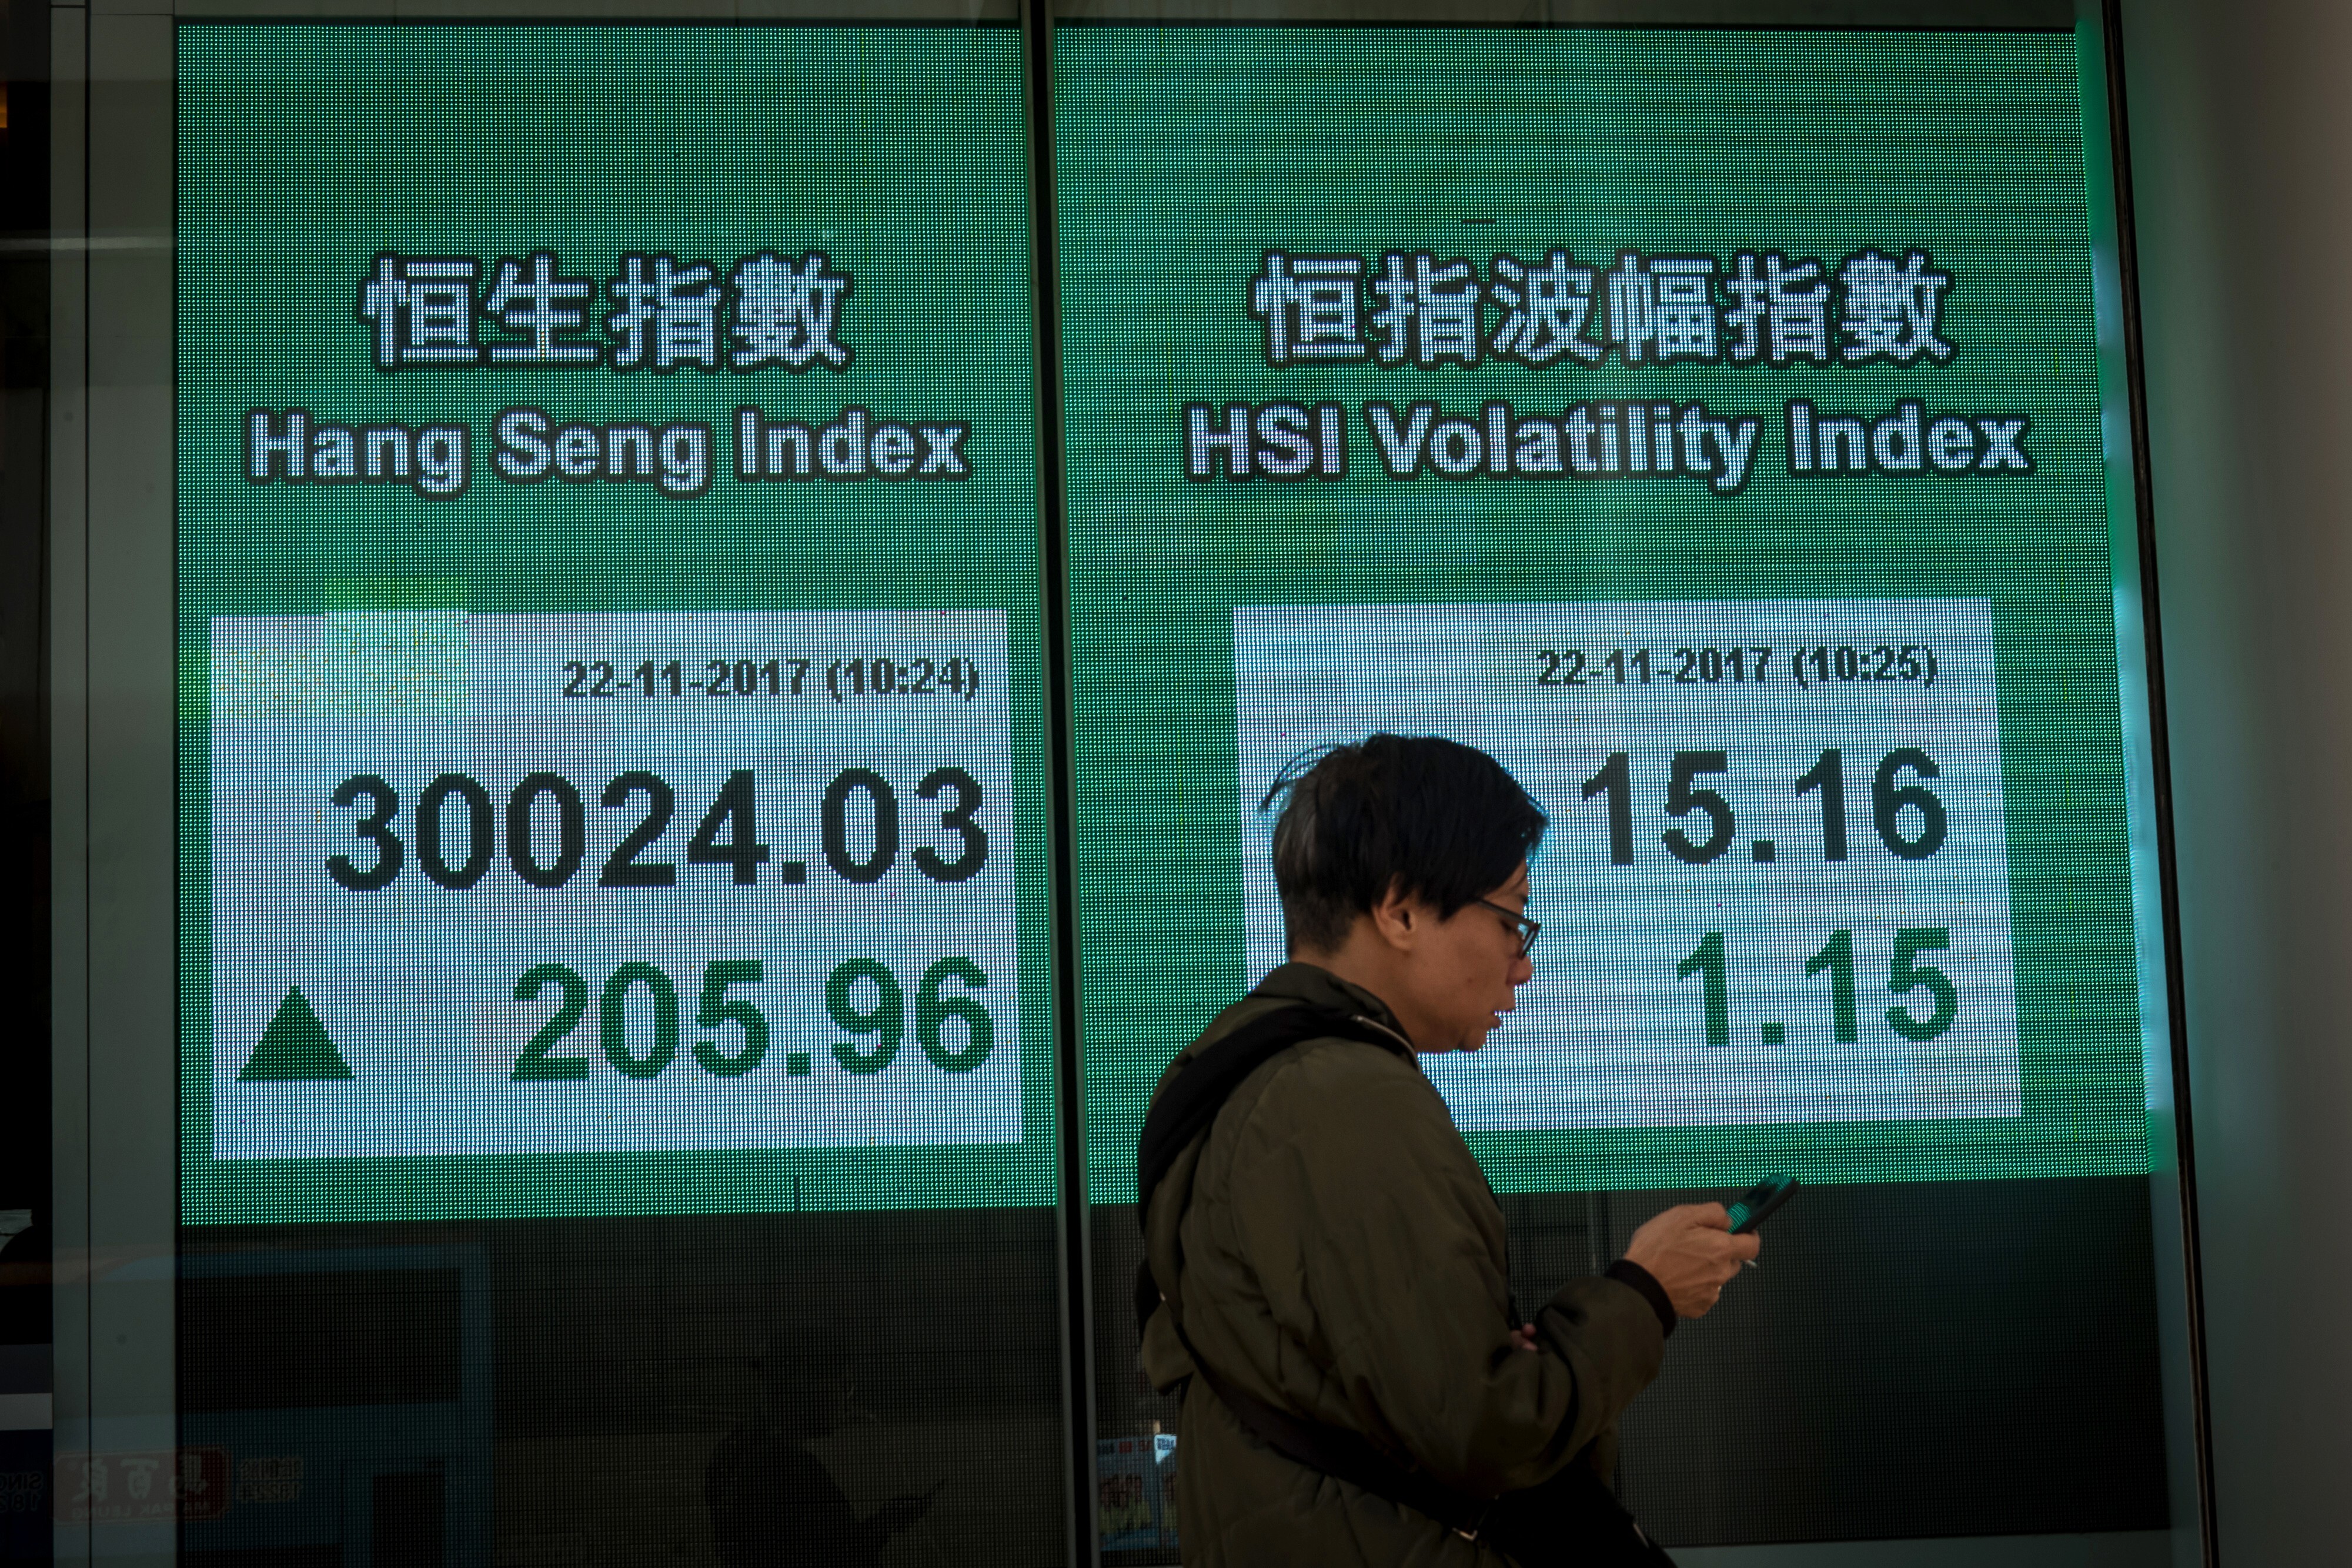 The Hang Seng Index comes within a hair’s breadth of 30,000 points on January 19, 2021, a level not seen since May 2019, amid record purchases by mainland funds. Photo: Bloomberg